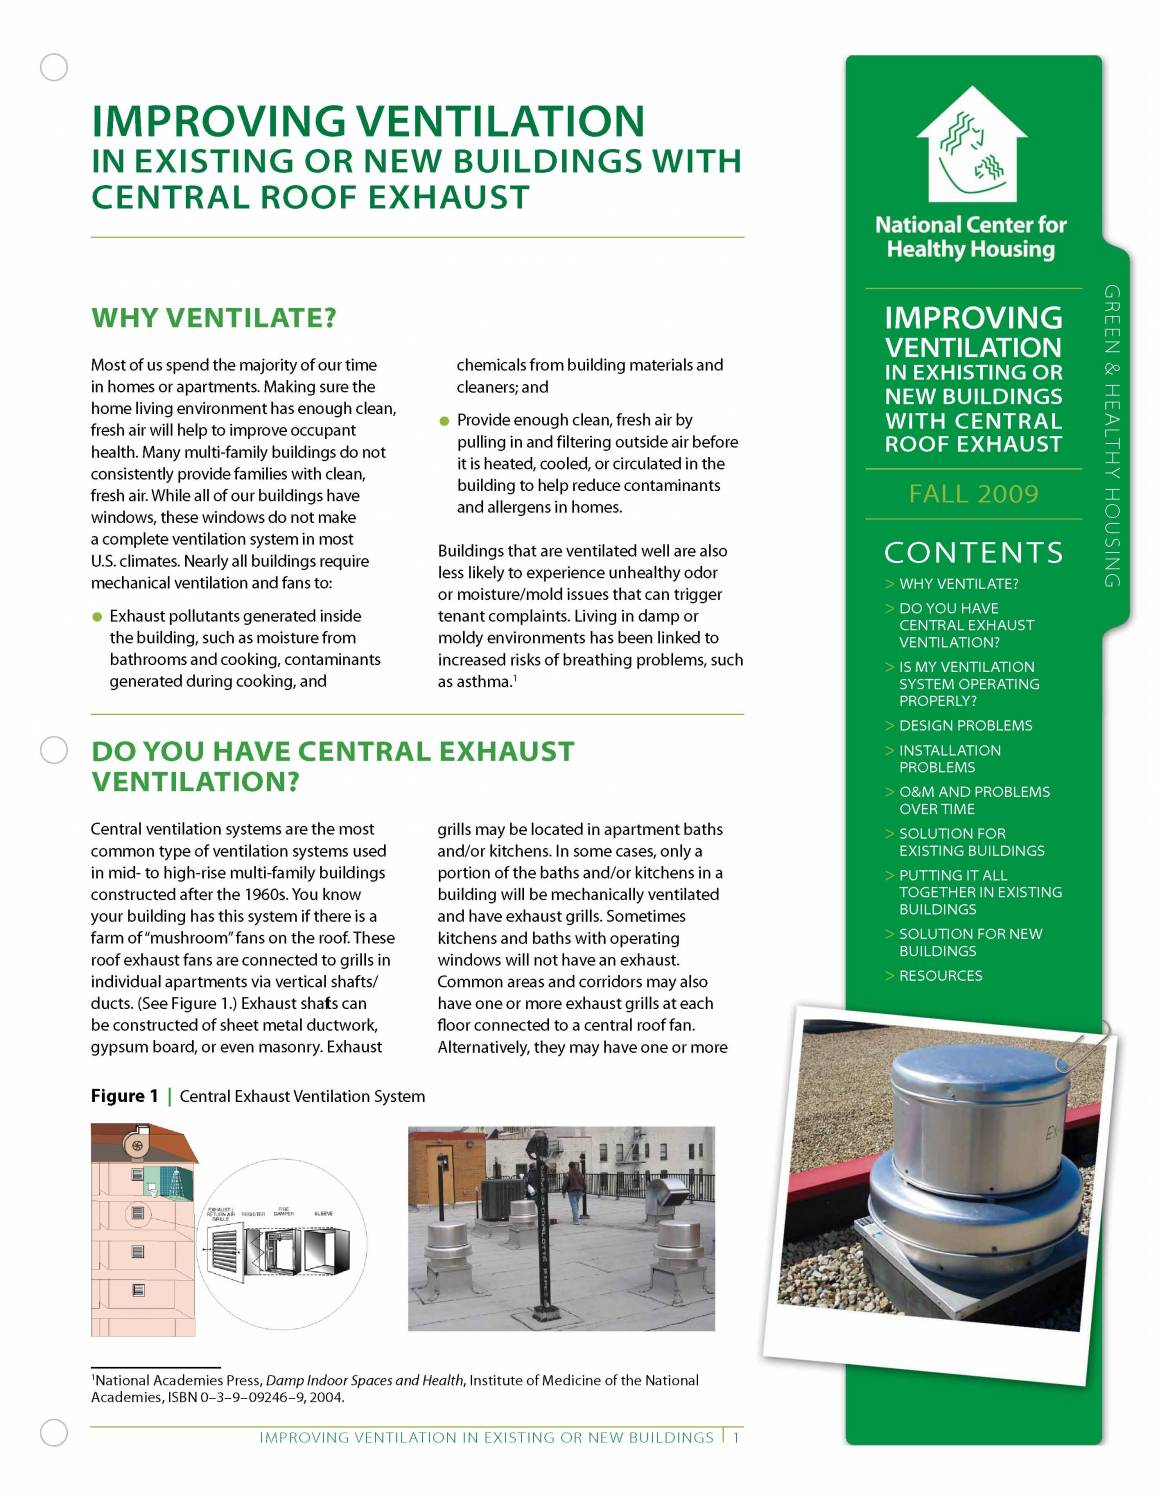 Fact Sheet: Green & Healthy Housing: Improving-Ventilation in Existing or New Buildings with Central Roof Exhaust